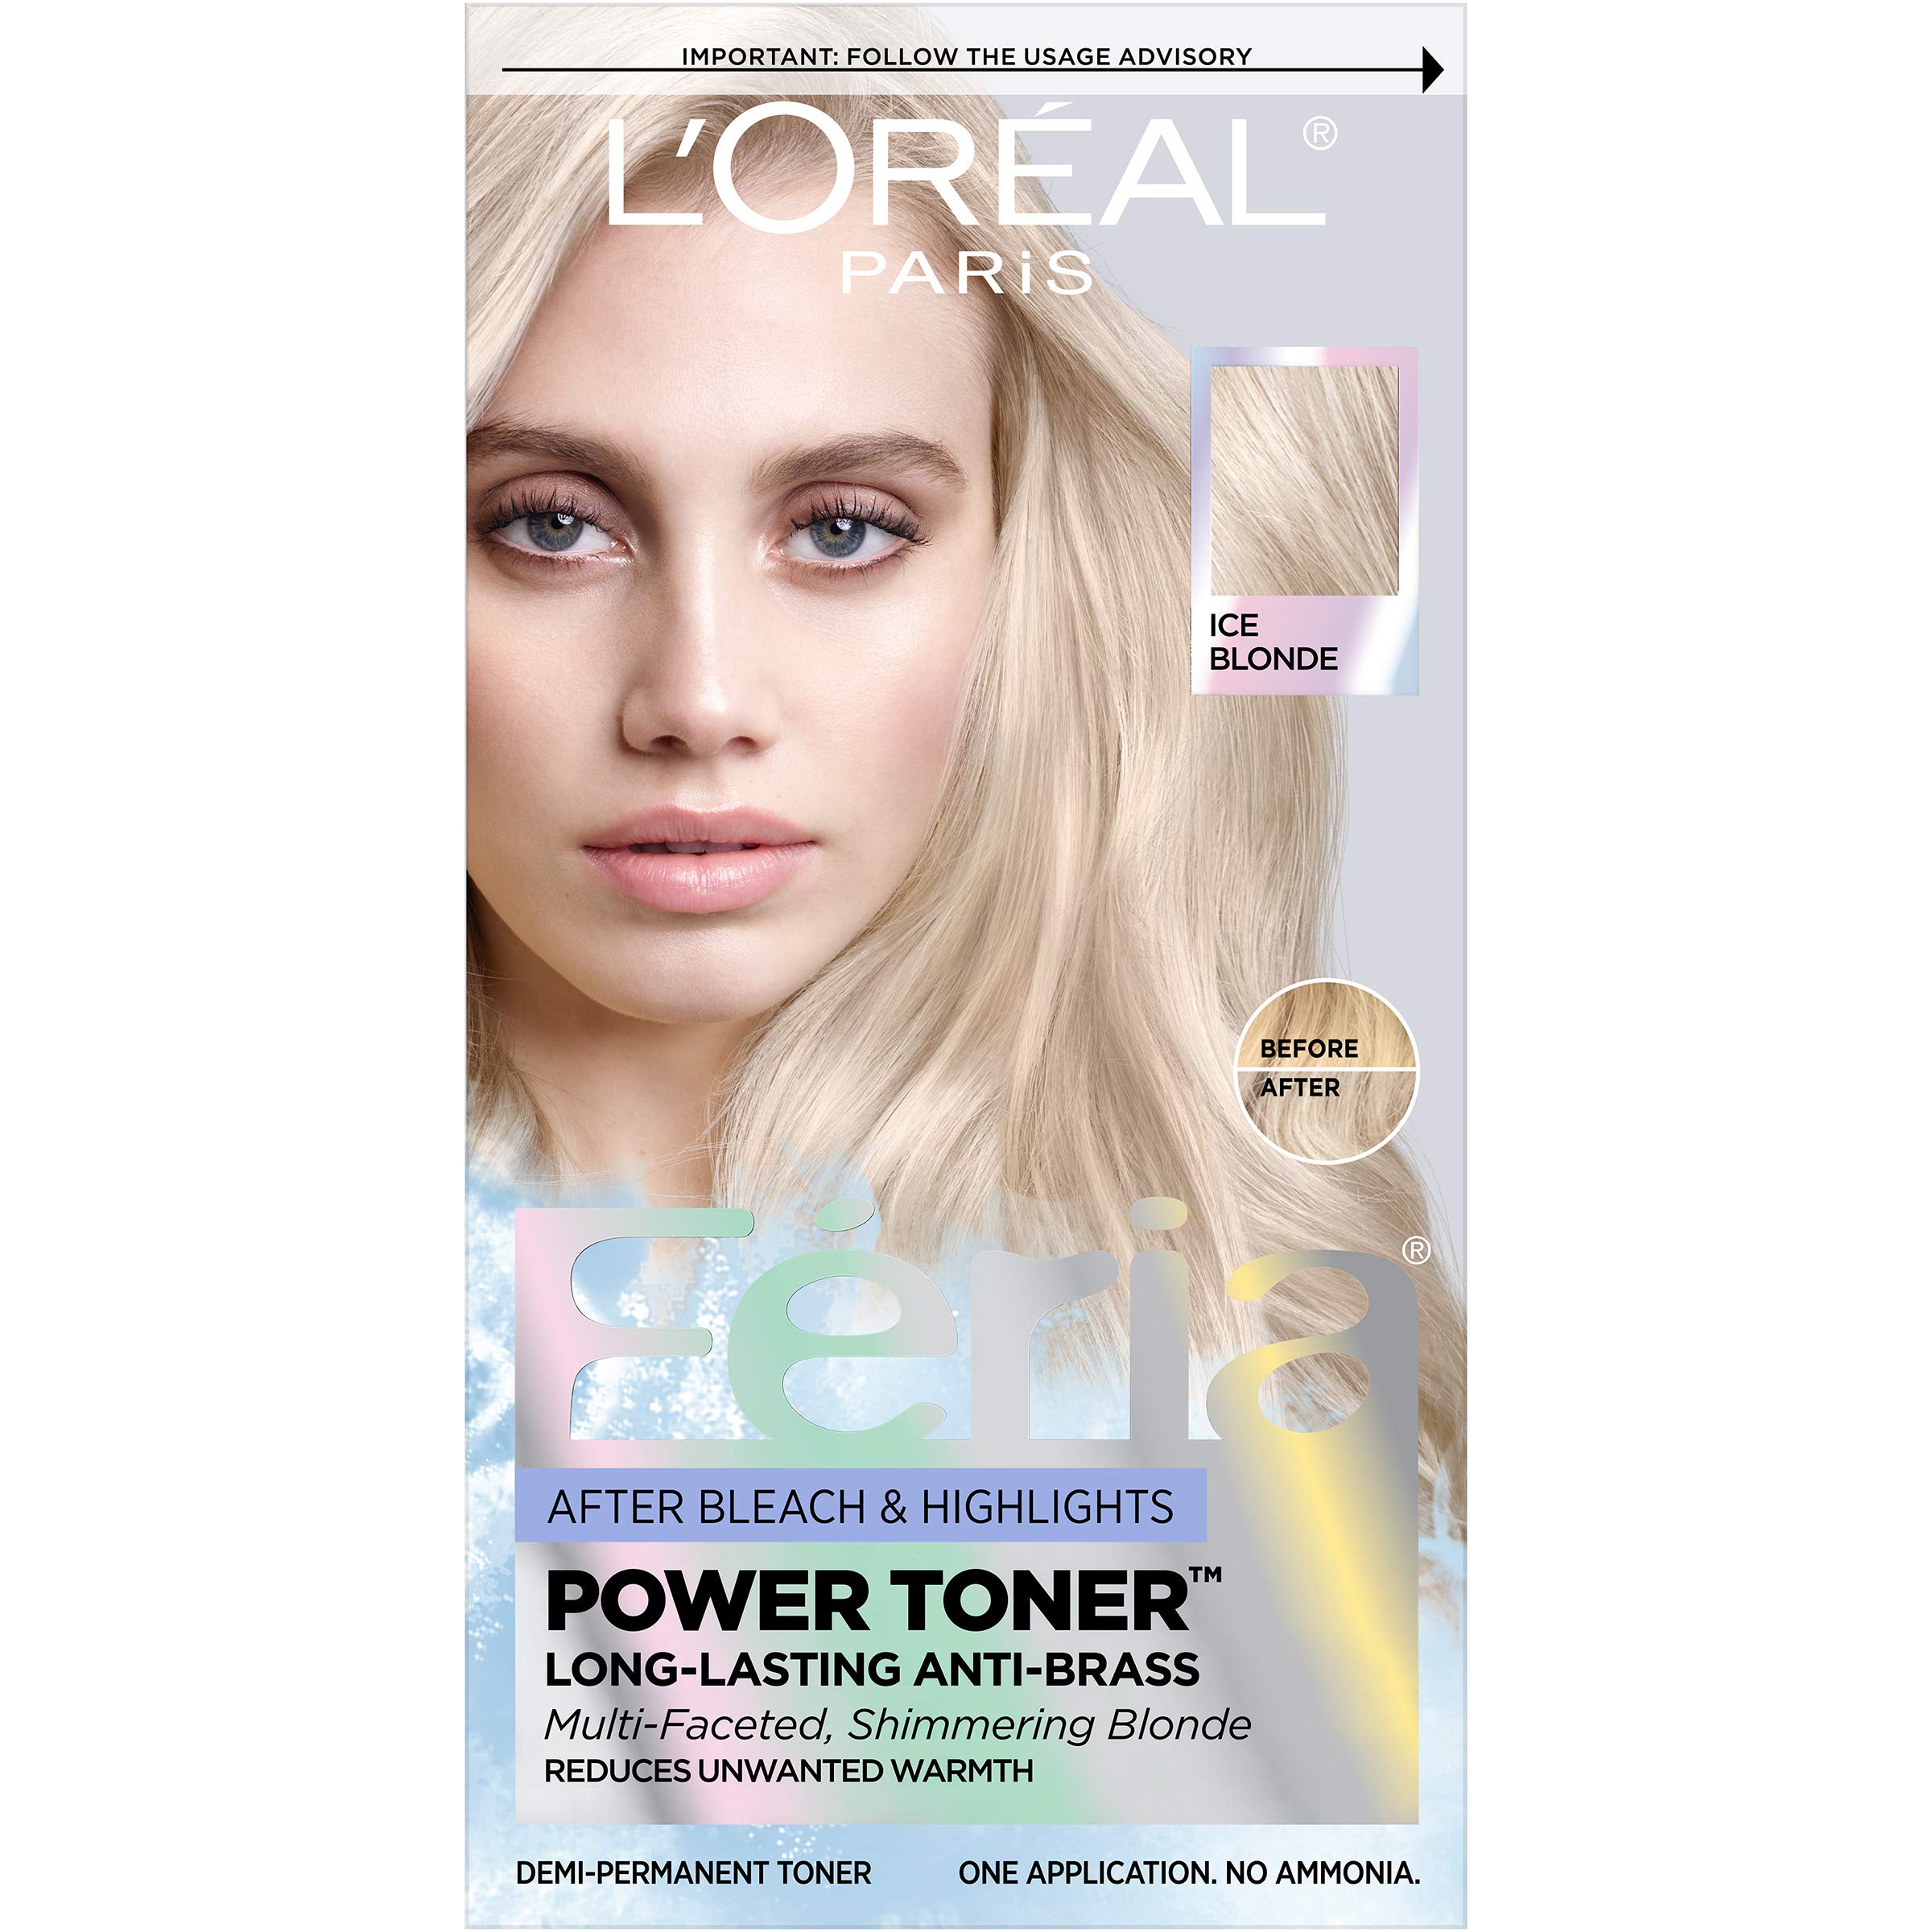 L’Oréal Paris Feria Power Hair Toner Long Lasting Anti brass Toner for blonde hair, bleached hair, blonde highlights, Reduce brassiness for all blonde hair types and textures, Ice Blonde 9P, 1 kit